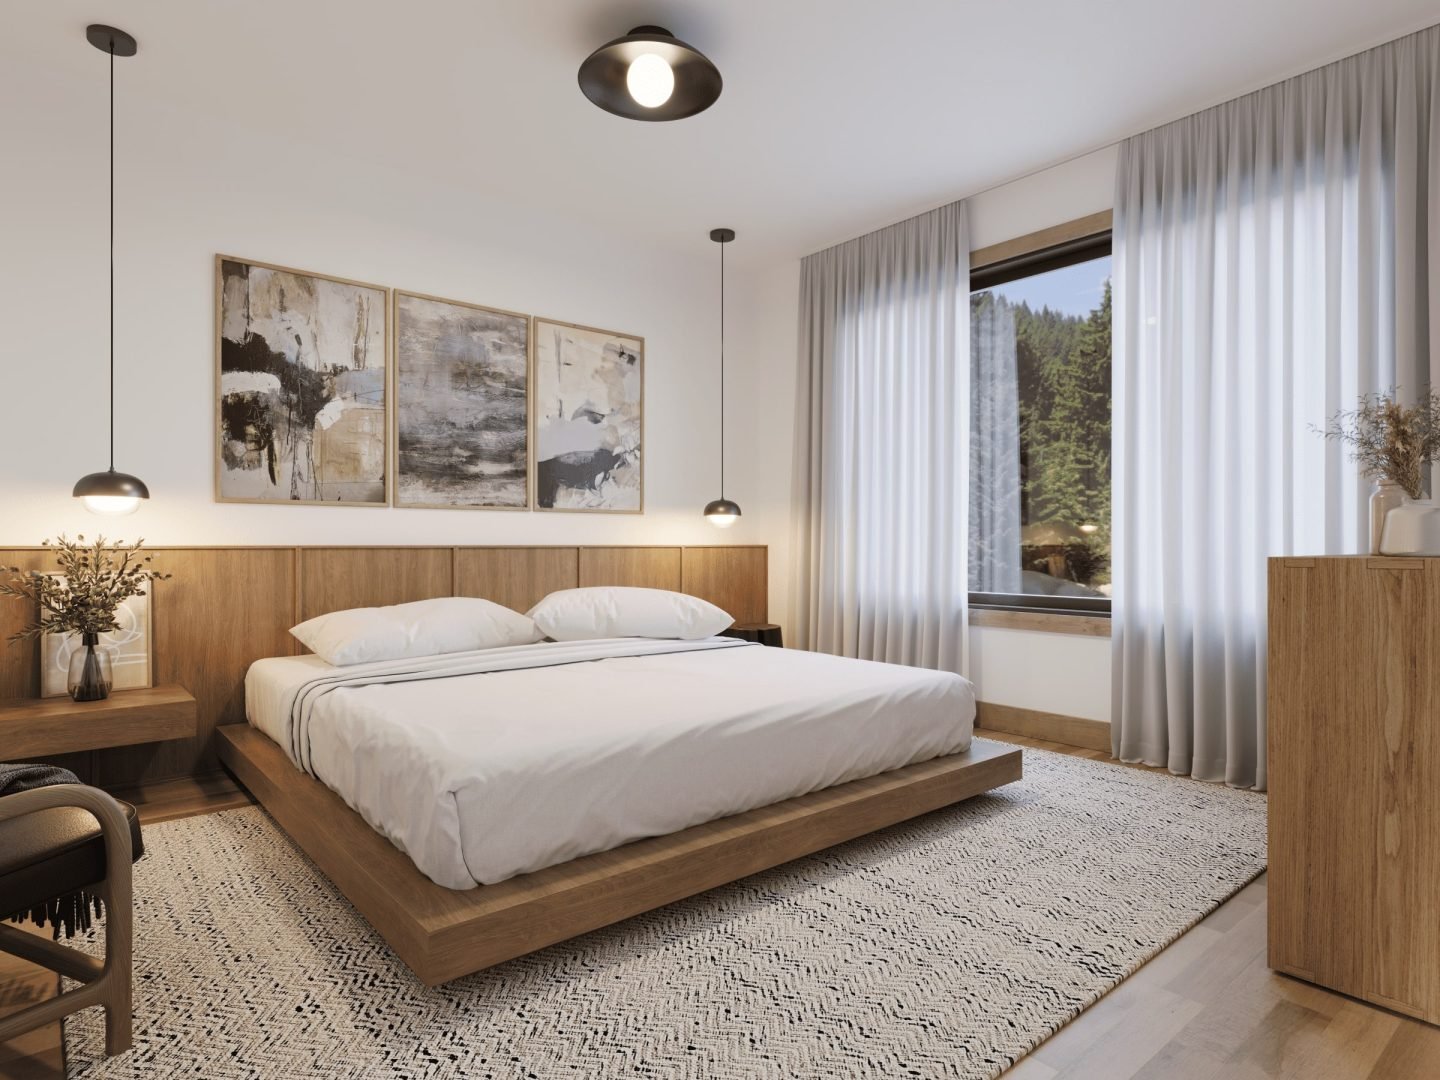 Chalet model called Horizon. Contemporary styling from the bedroom.